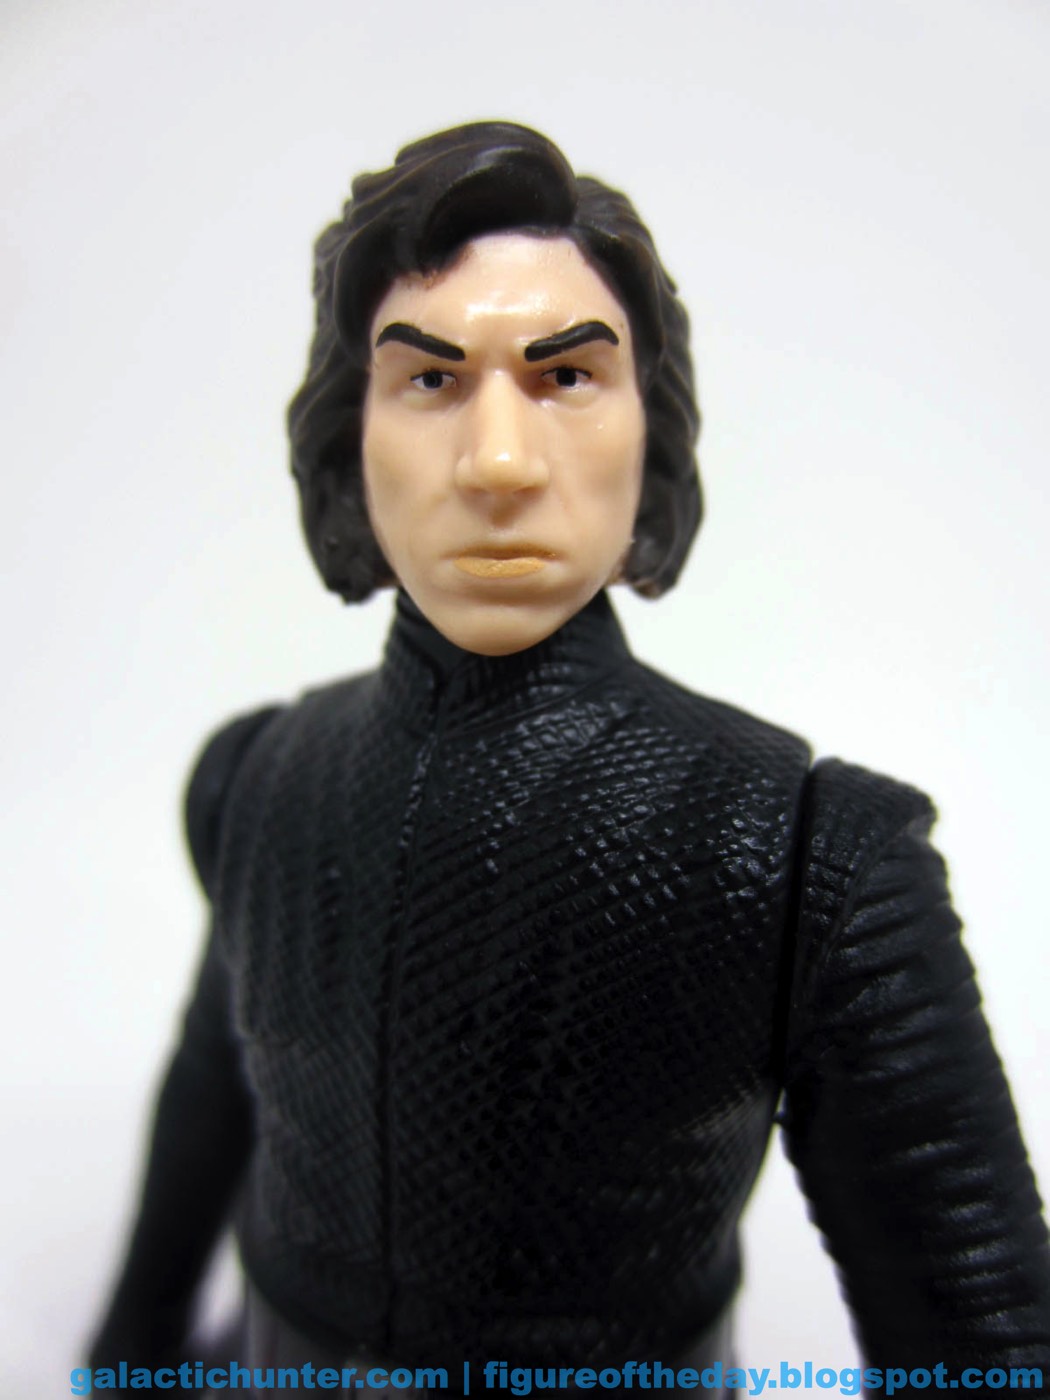 solo opstrøms Grundlægger Galactic Hunter's Star Wars Figure of the Day with Adam Pawlus: Star Wars  Figure of the Day: Day 2,265: Kylo Ren Unmasked (The Force Awakens)